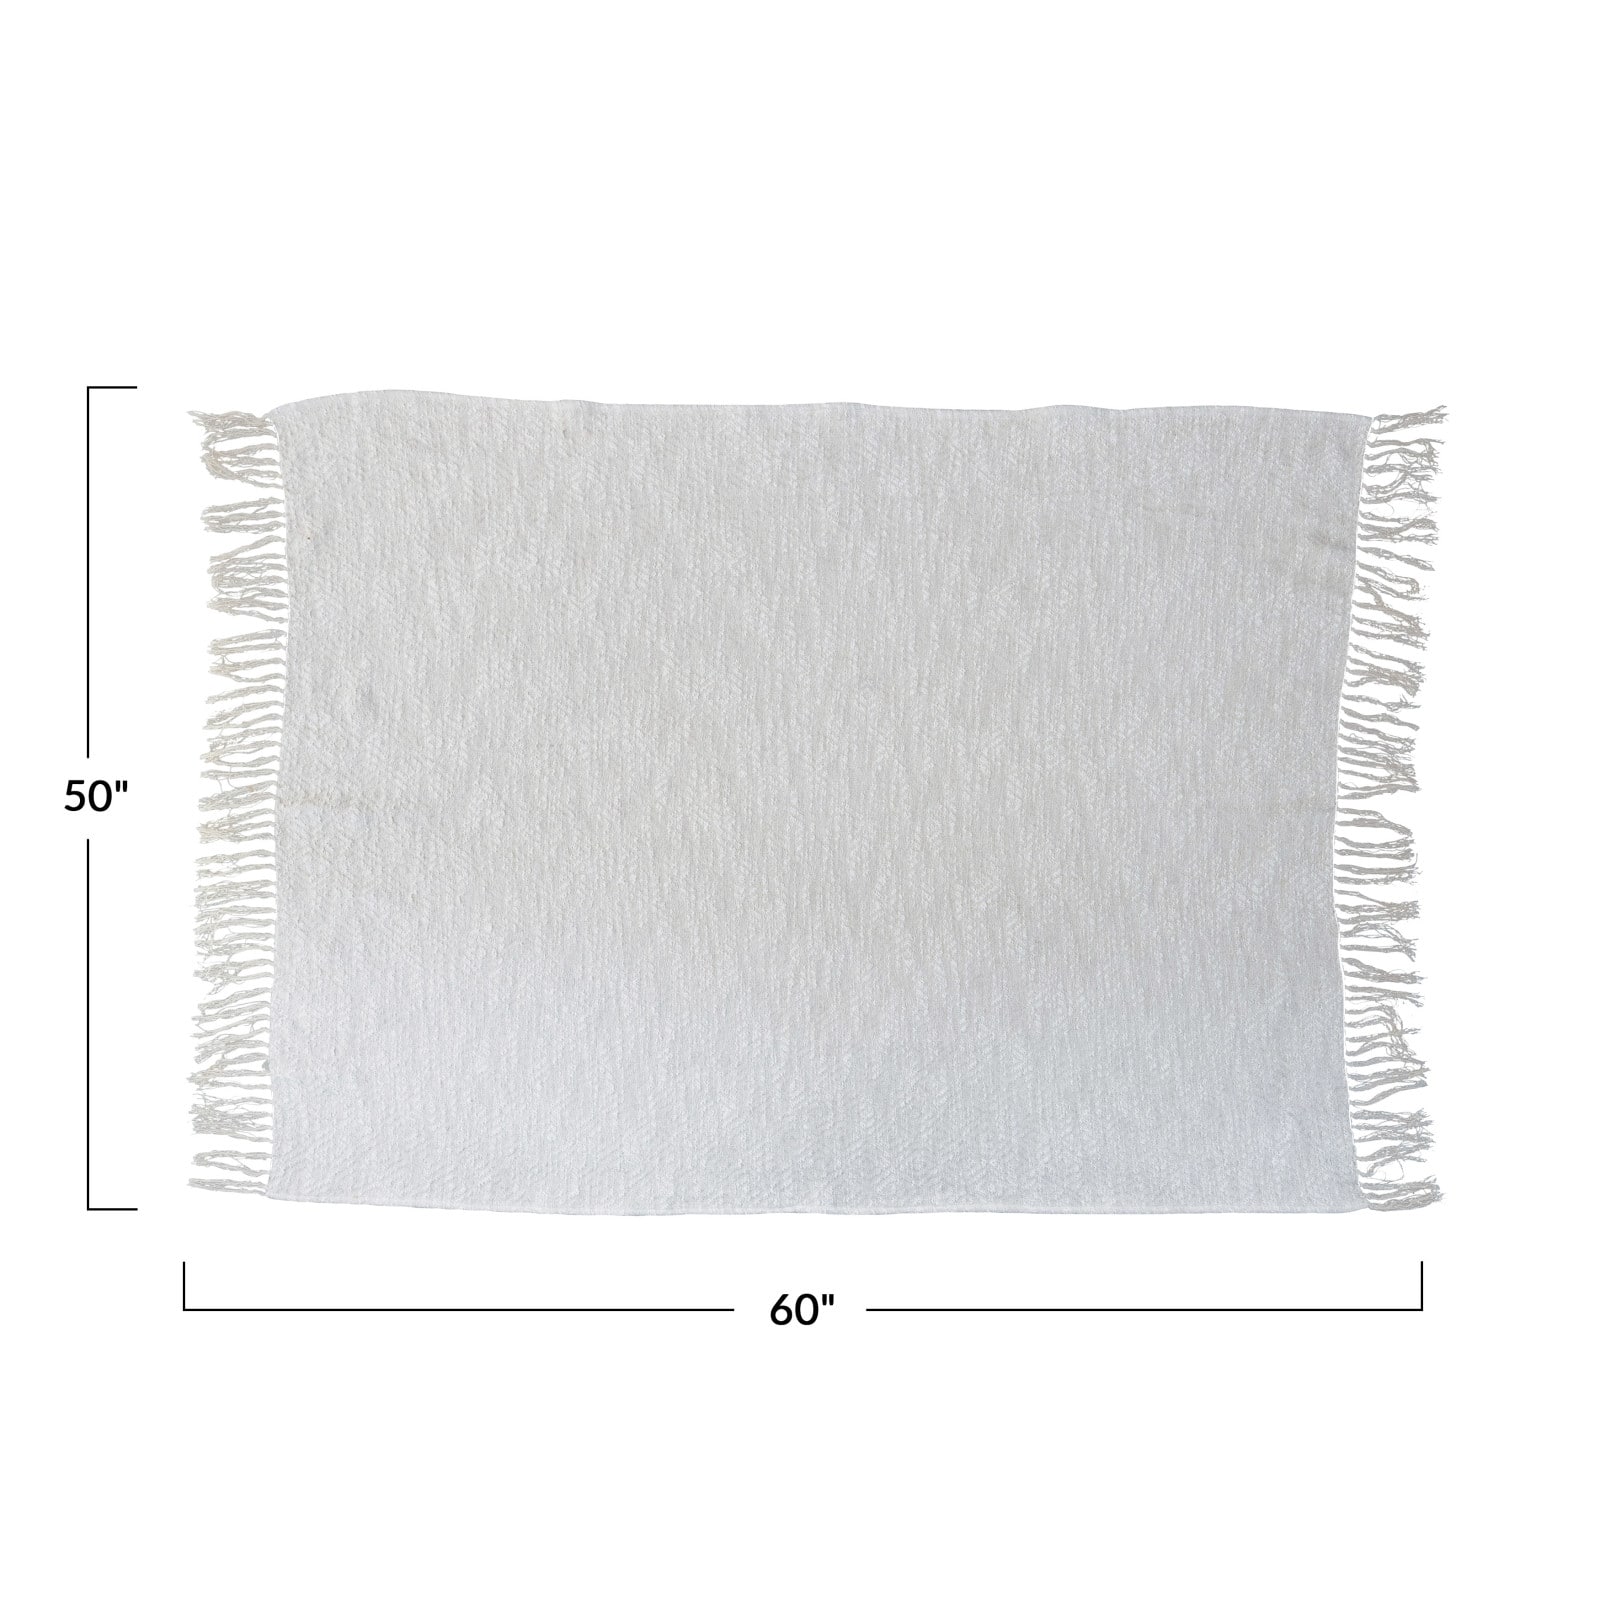  Cotton Throw Blanket with Silver Metallic Thread and Fringe, Cream